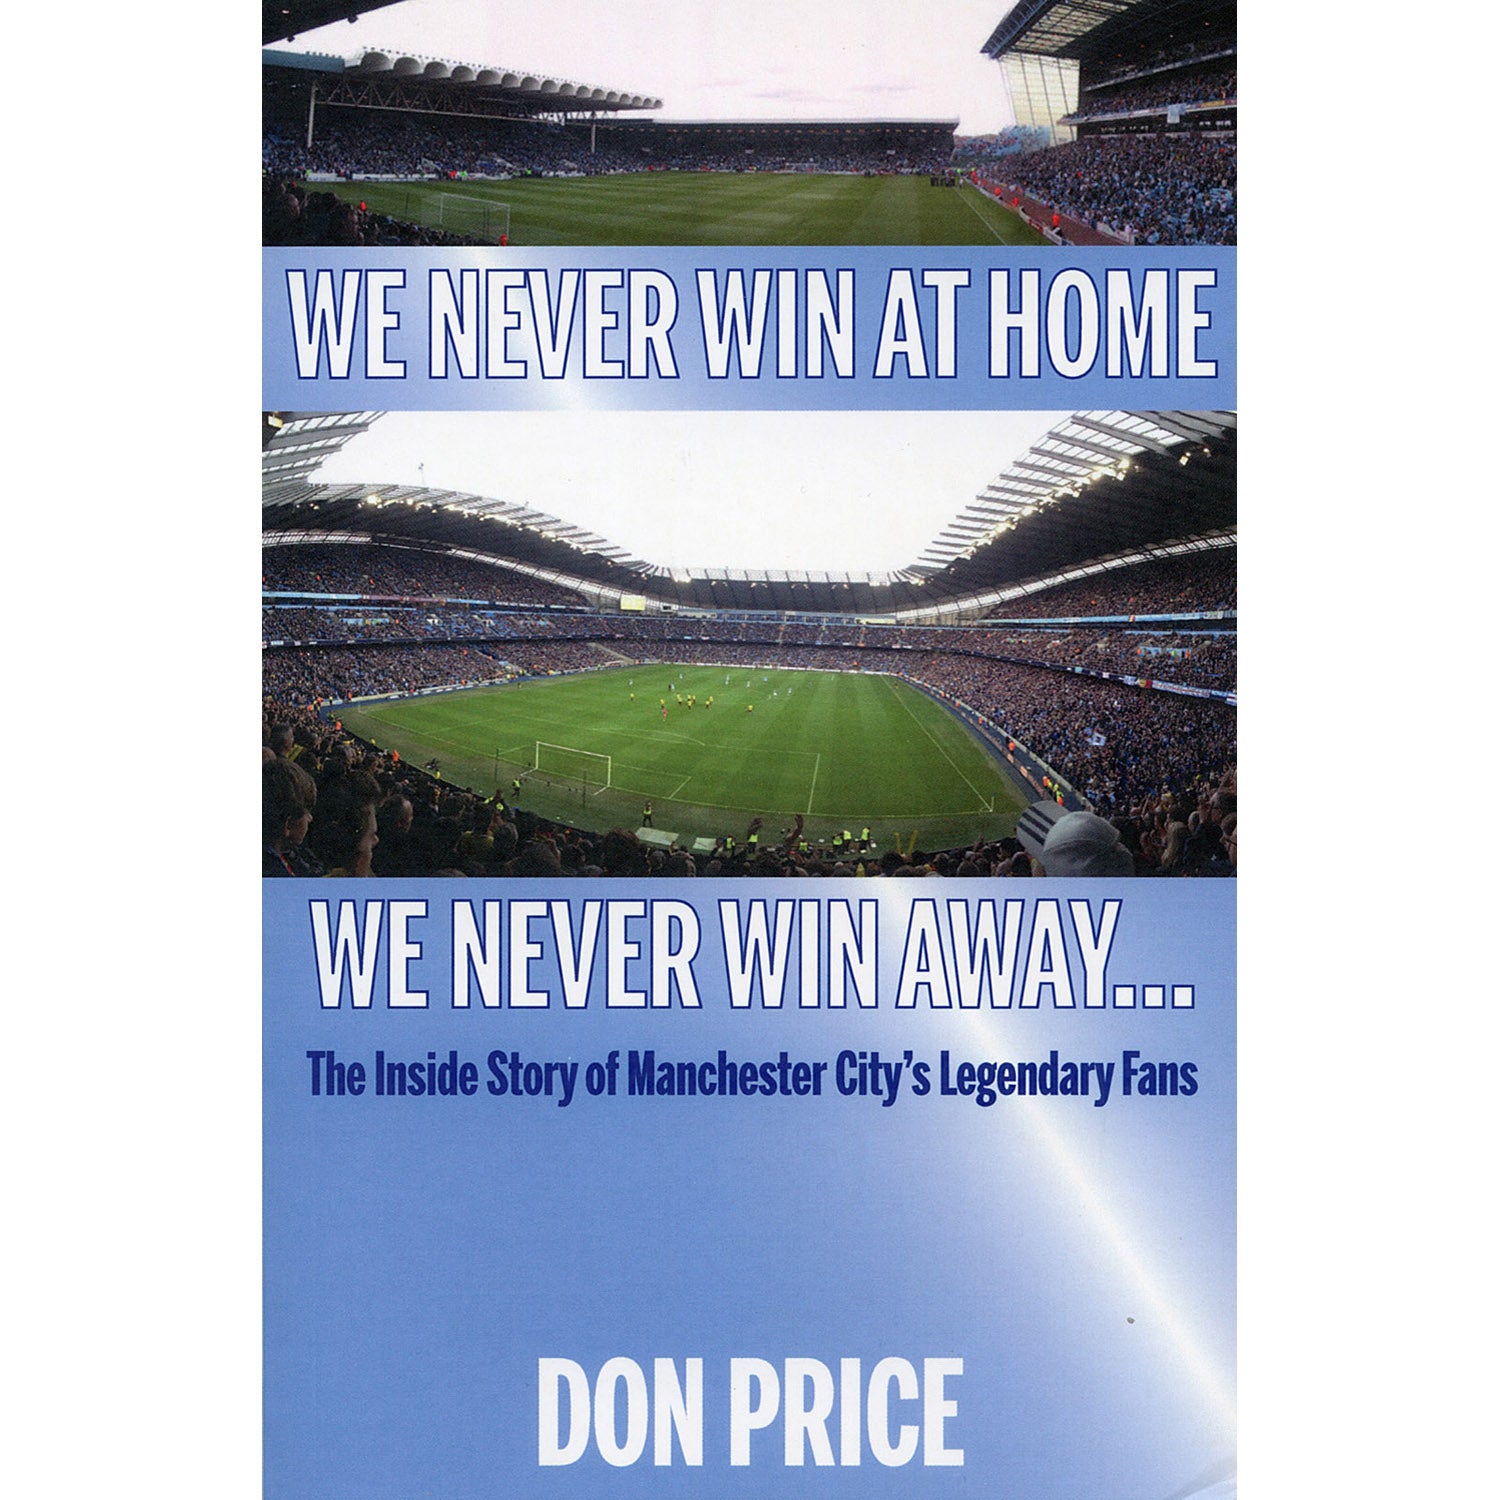 We Never Win At Home, We Never Win Away… The Inside Story of Manchester City's Legendary Fans